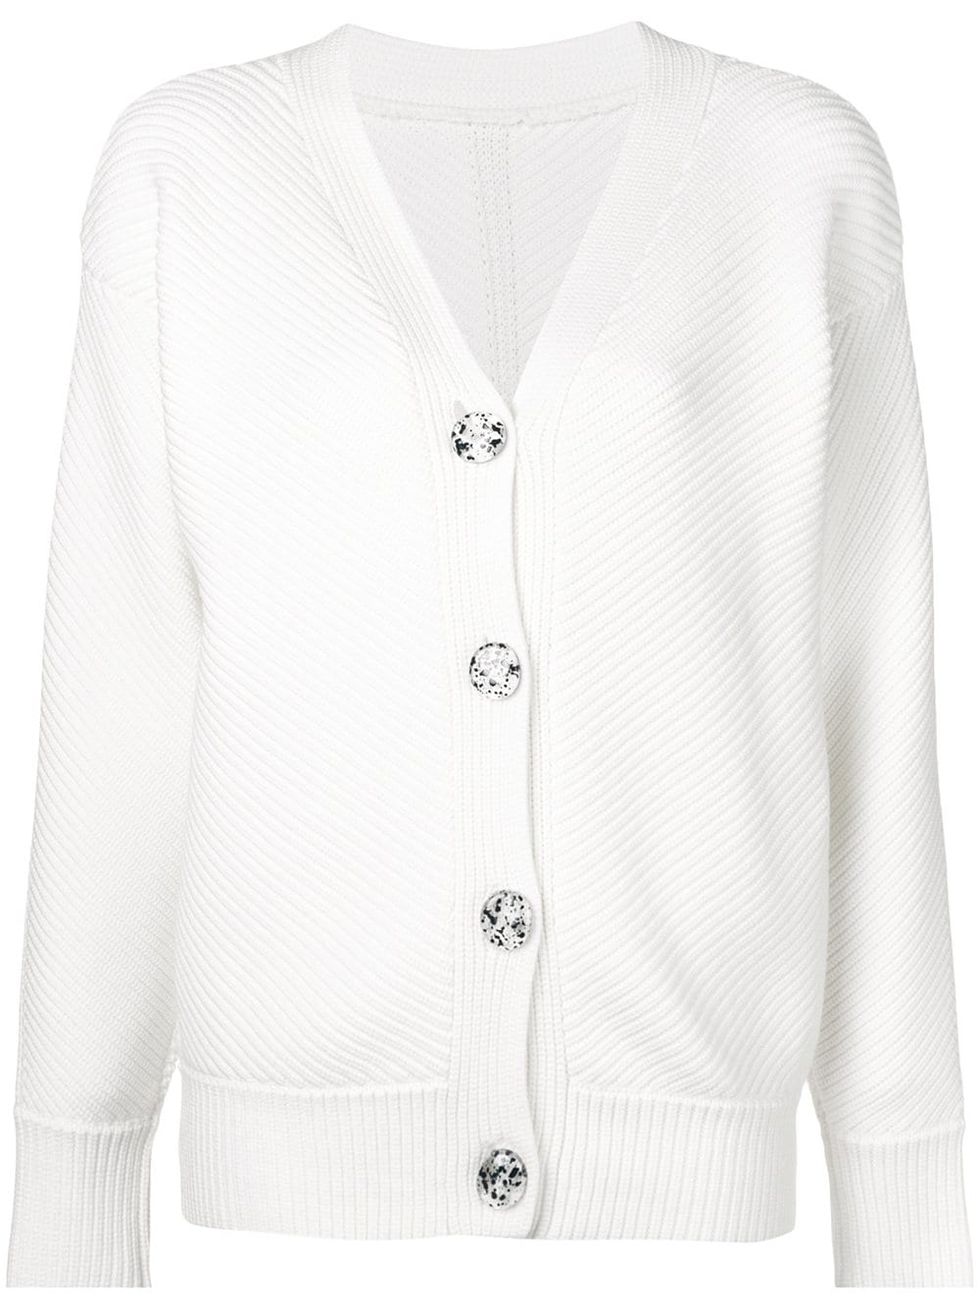 Clothing, Outerwear, White, Sweater, Cardigan, Sleeve, Neck, Top, Jacket, Button, 